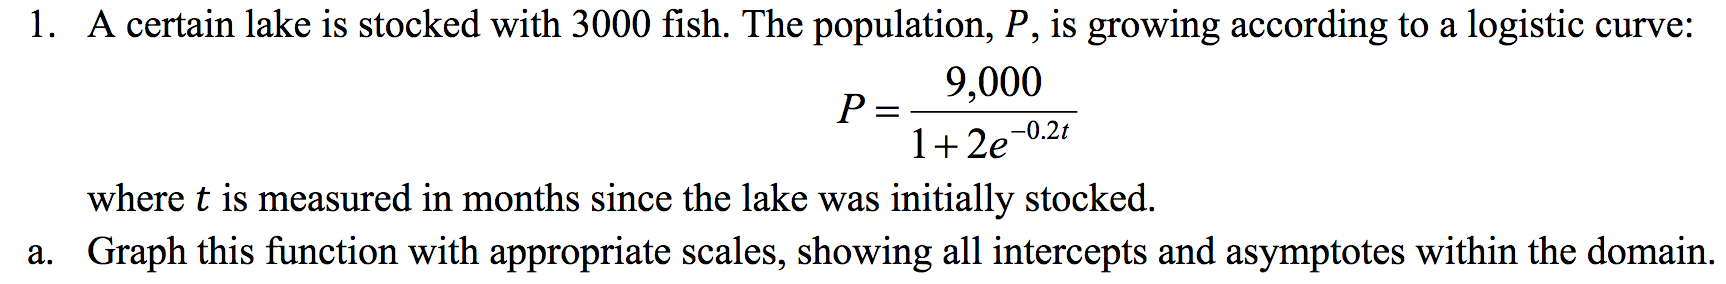 1. A certain lake is stocked with 3000 fish. The population, P, is growing according to a logistic curve:
9,000
P =
1 2e
-0.2t
where t is measured in months since the lake was initially stocked.
a. Graph this function with appropriate scales, showing all intercepts and asymptotes within the domain.
